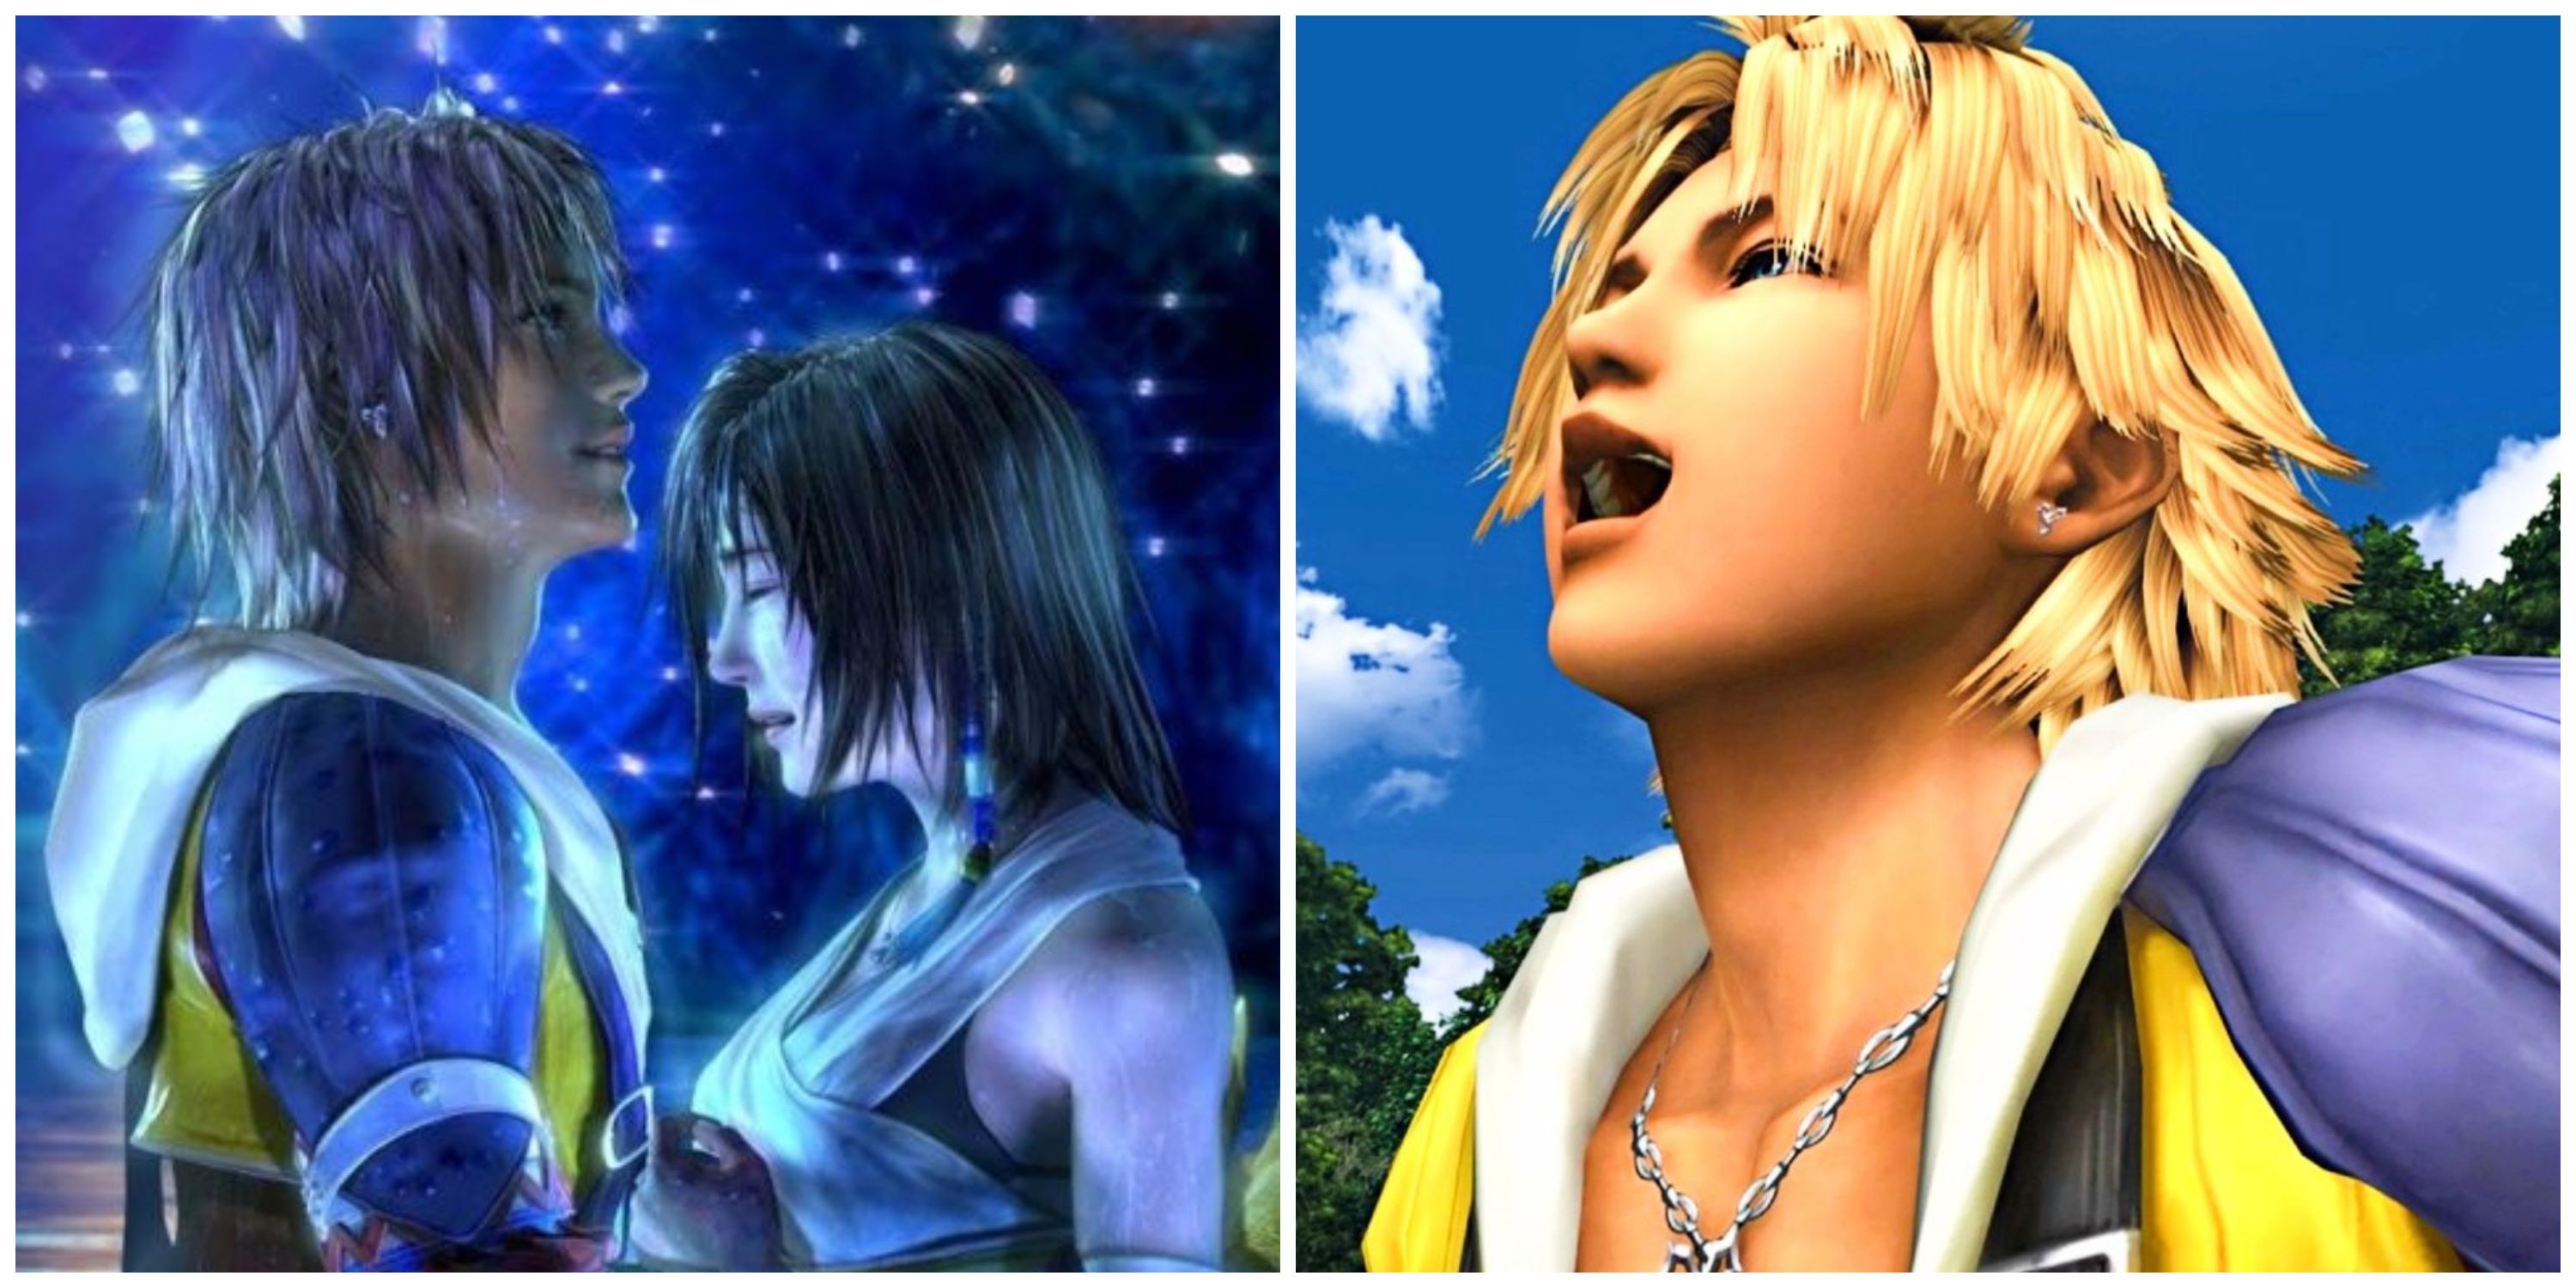 Final Fantasy 10: All Versions, Ranked